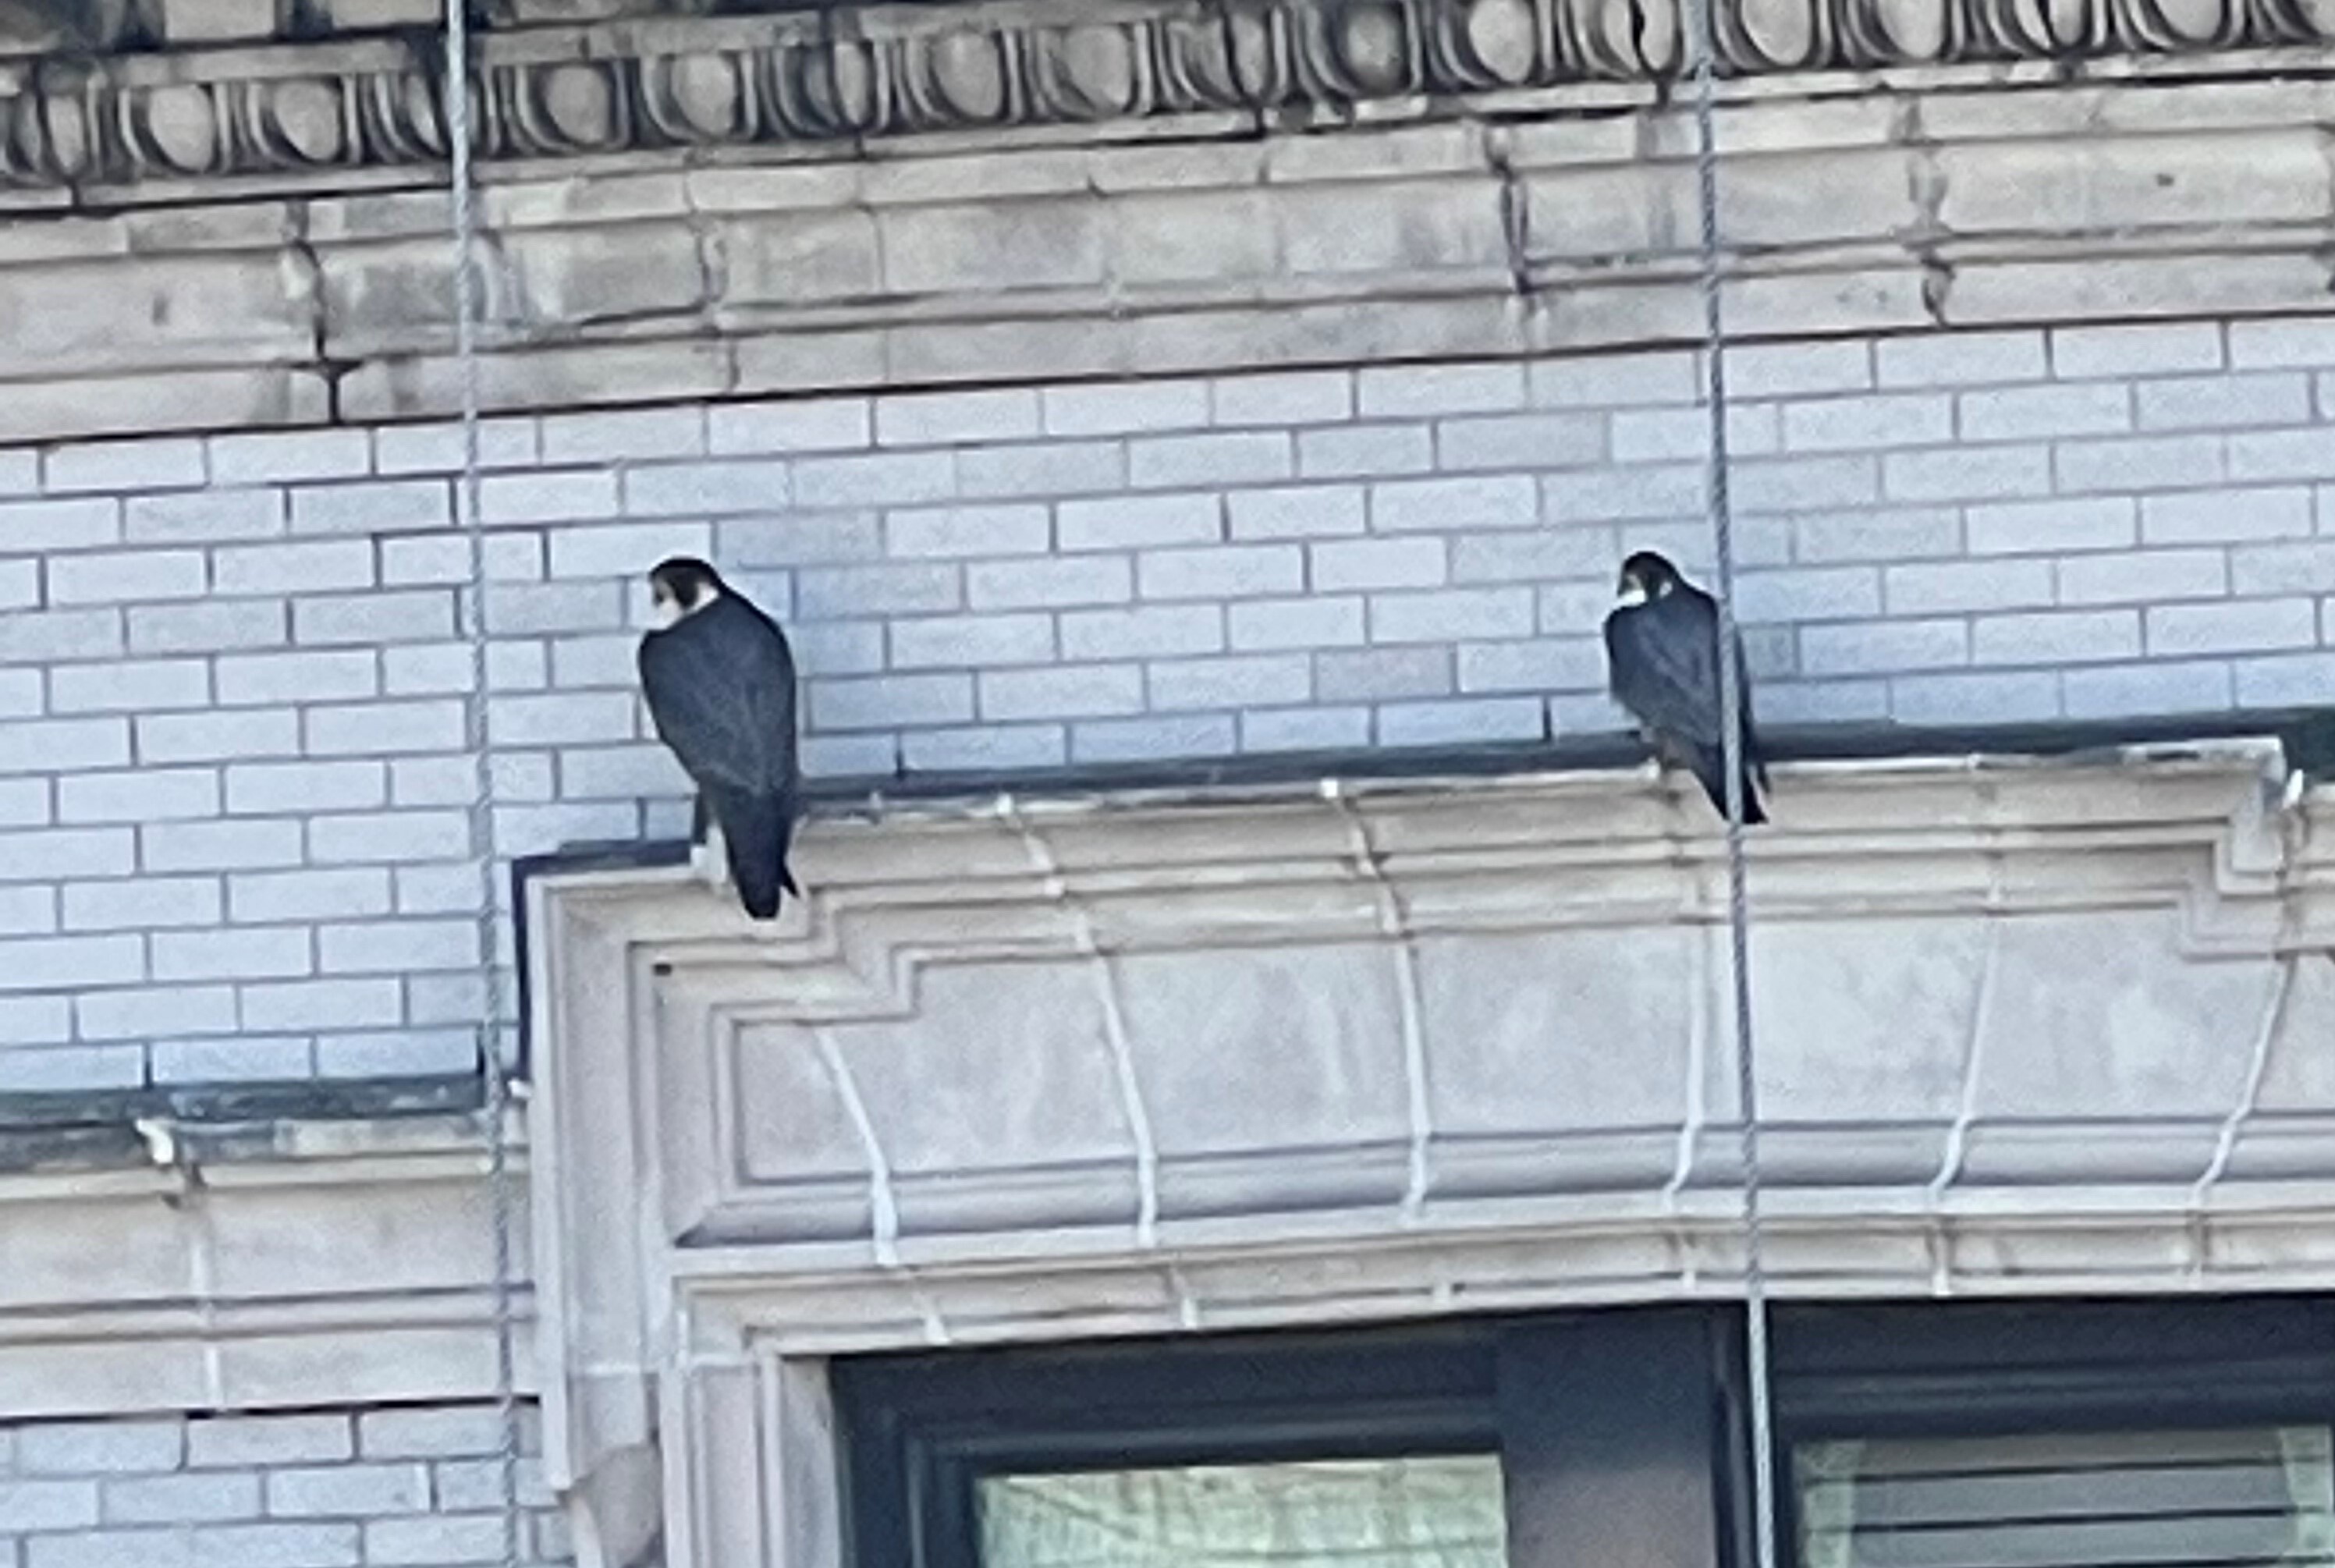 The peregrine pair together, showing the great size difference between the larger female (left) and her mate. Photo: Karen Benfield